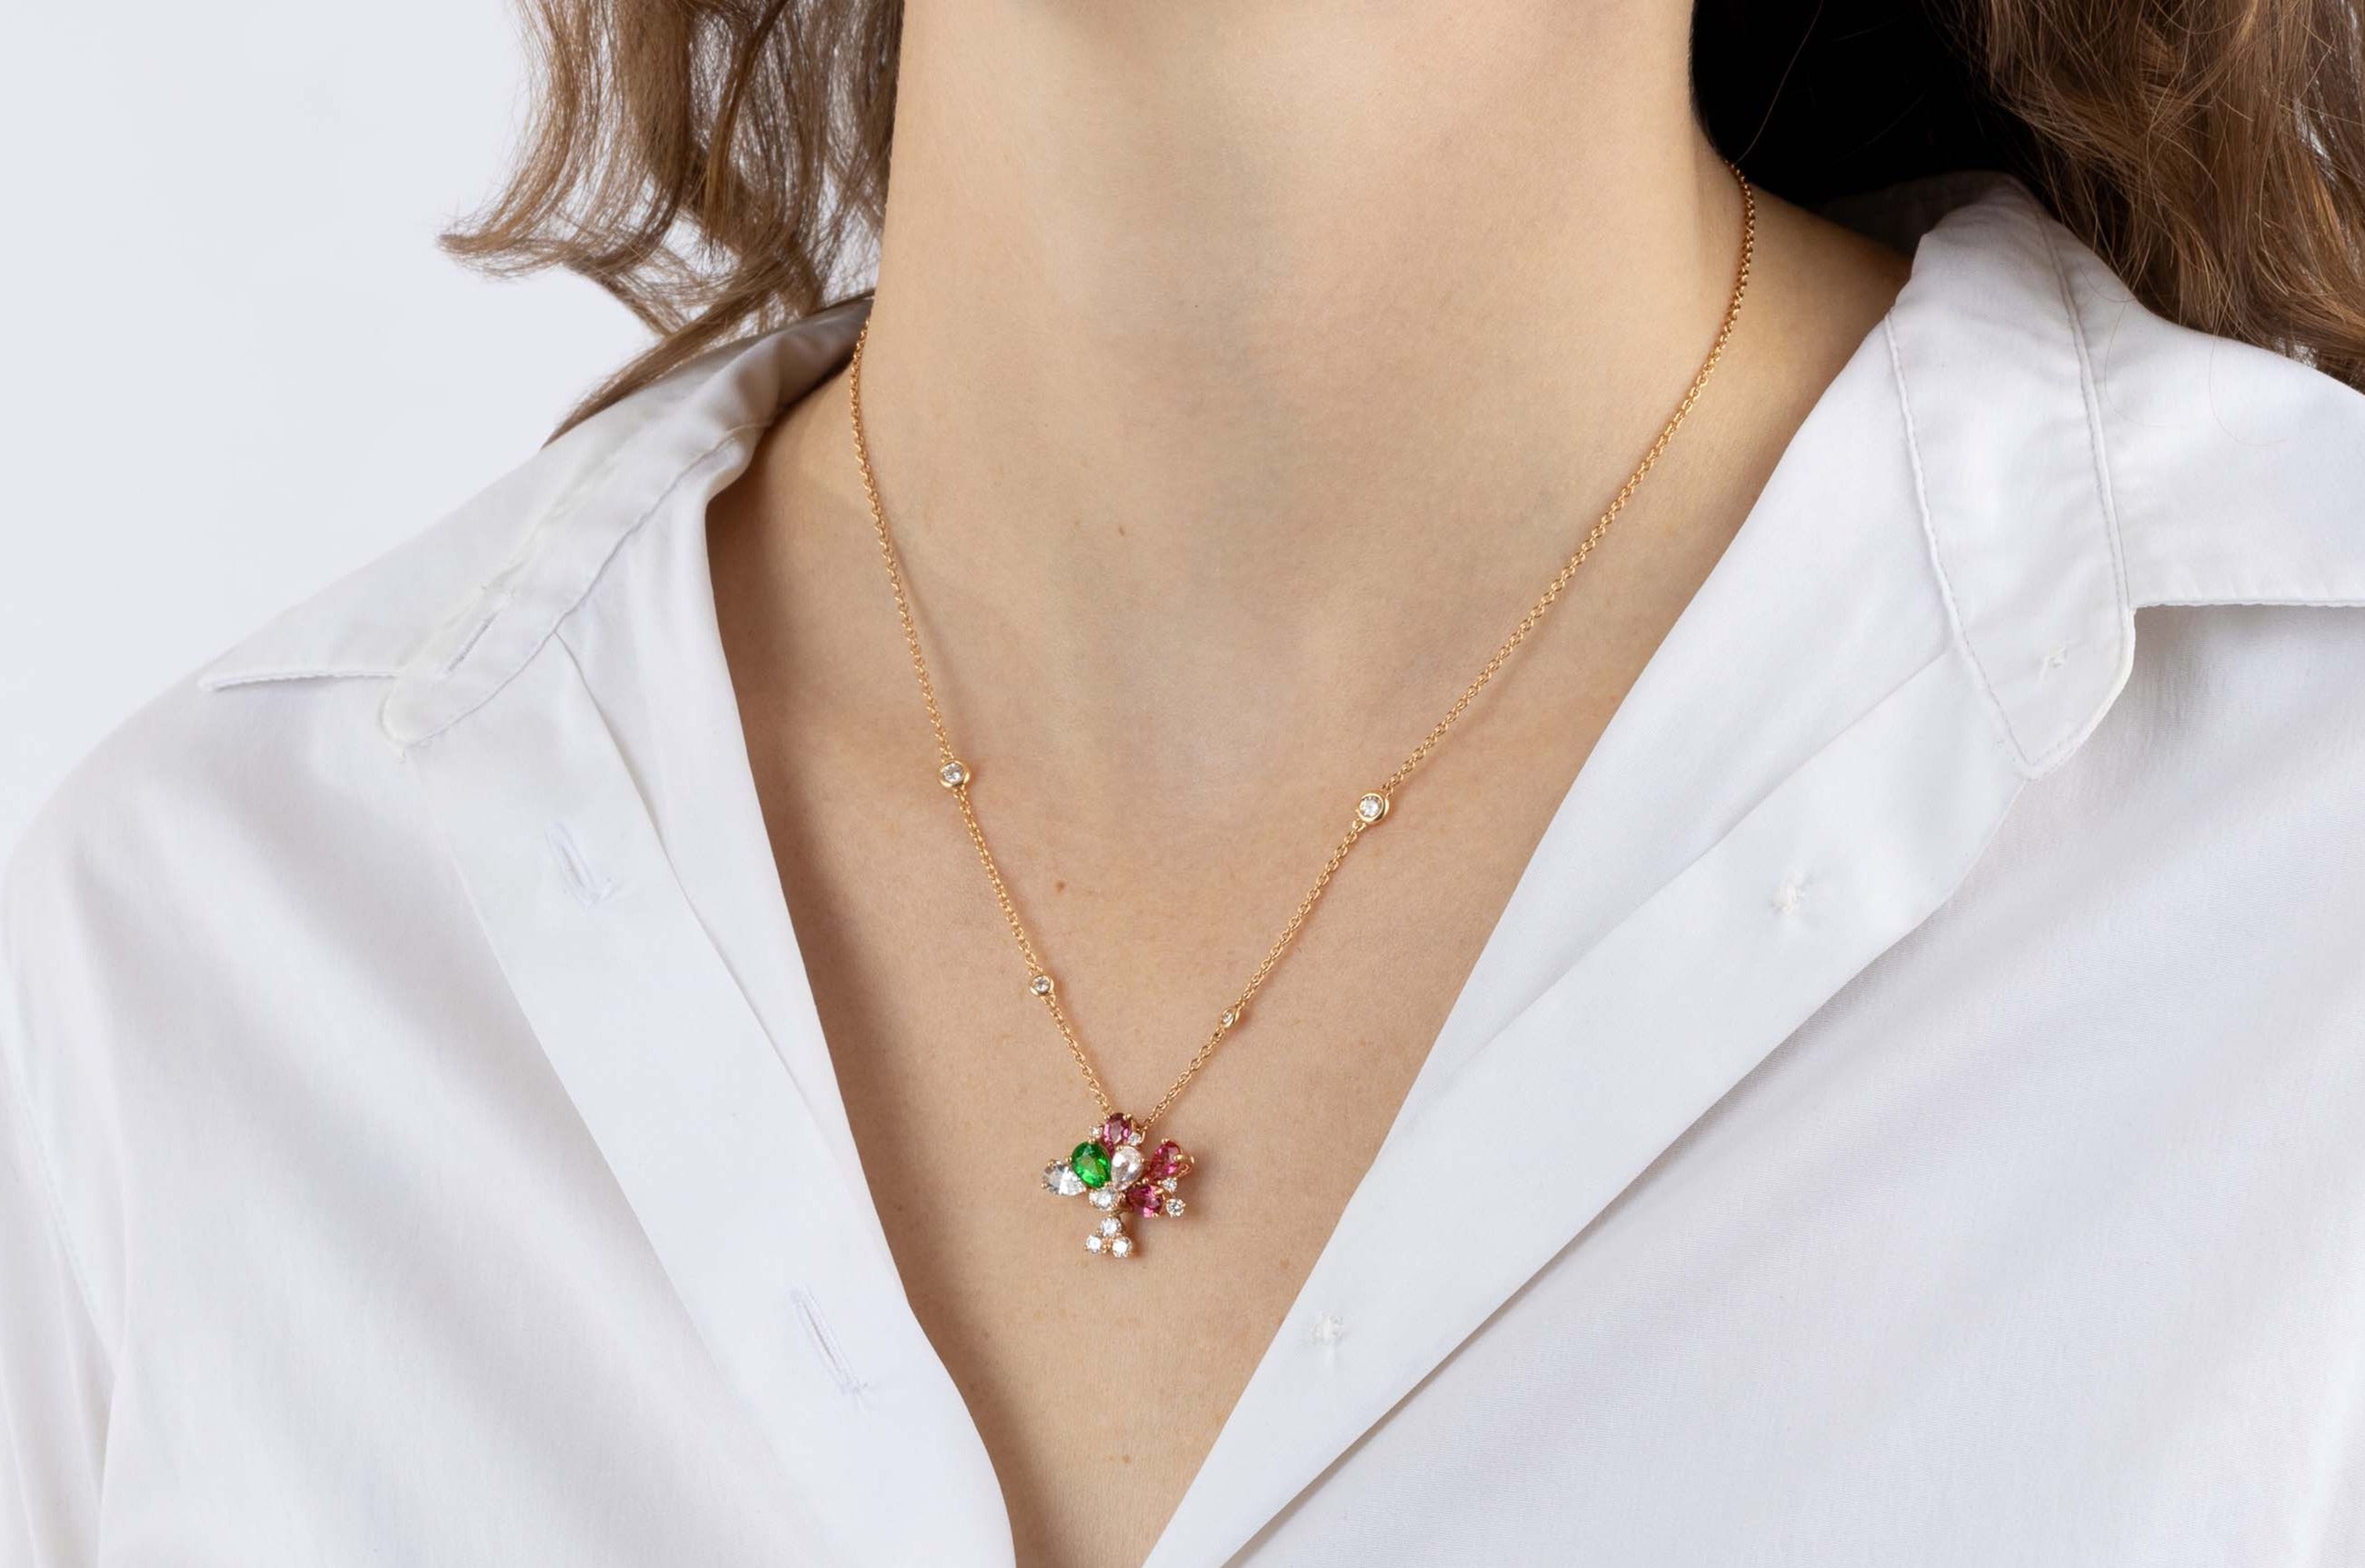 Rose Gold Necklace with Pink and White Sapphires, Tsavorite, and Diamonds, Medium - Model shot